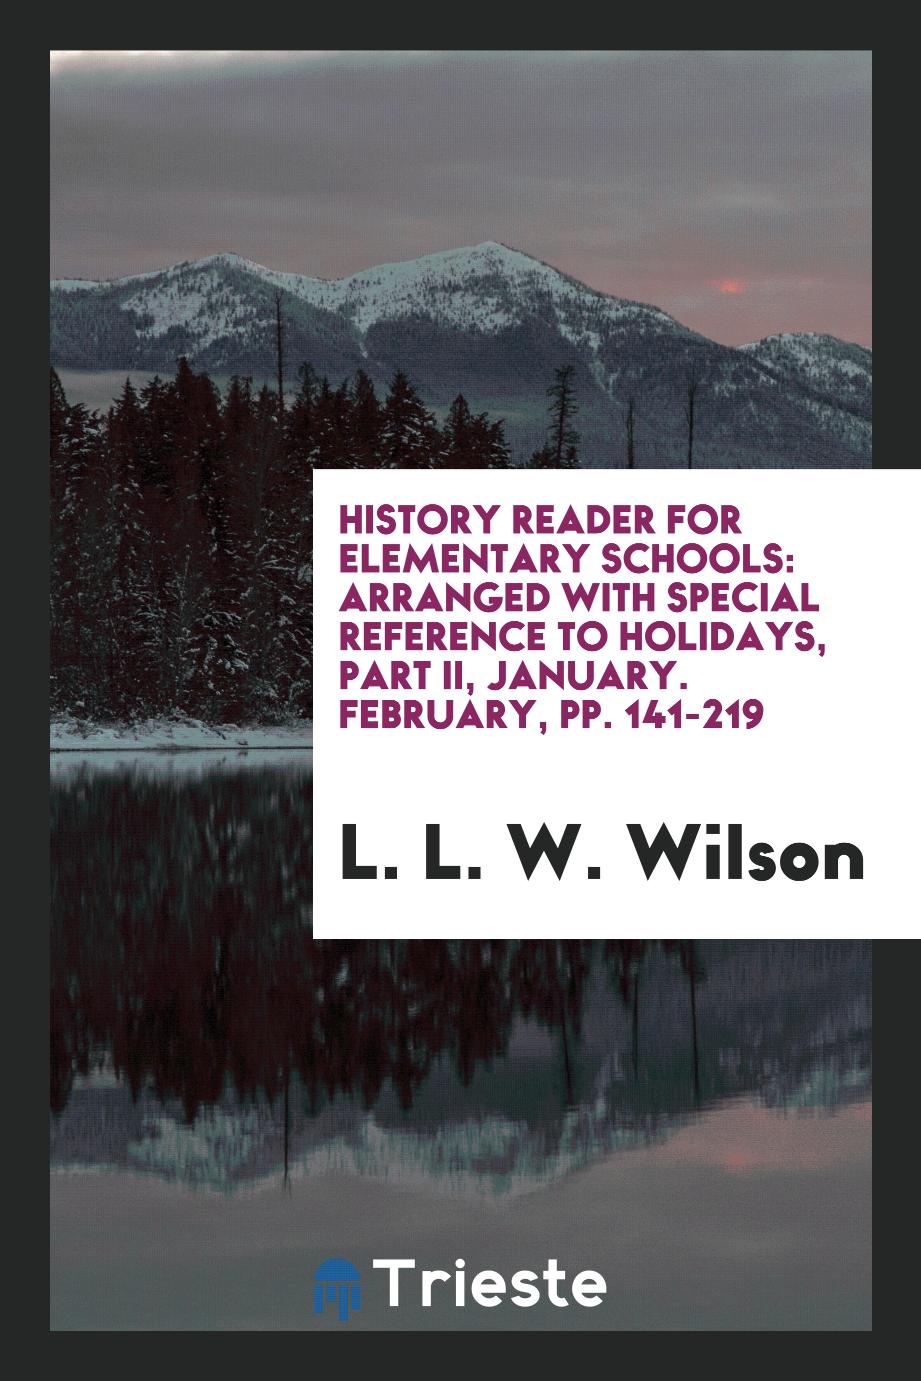 History Reader for Elementary Schools: Arranged with Special Reference to Holidays, Part II, January. February, pp. 141-219